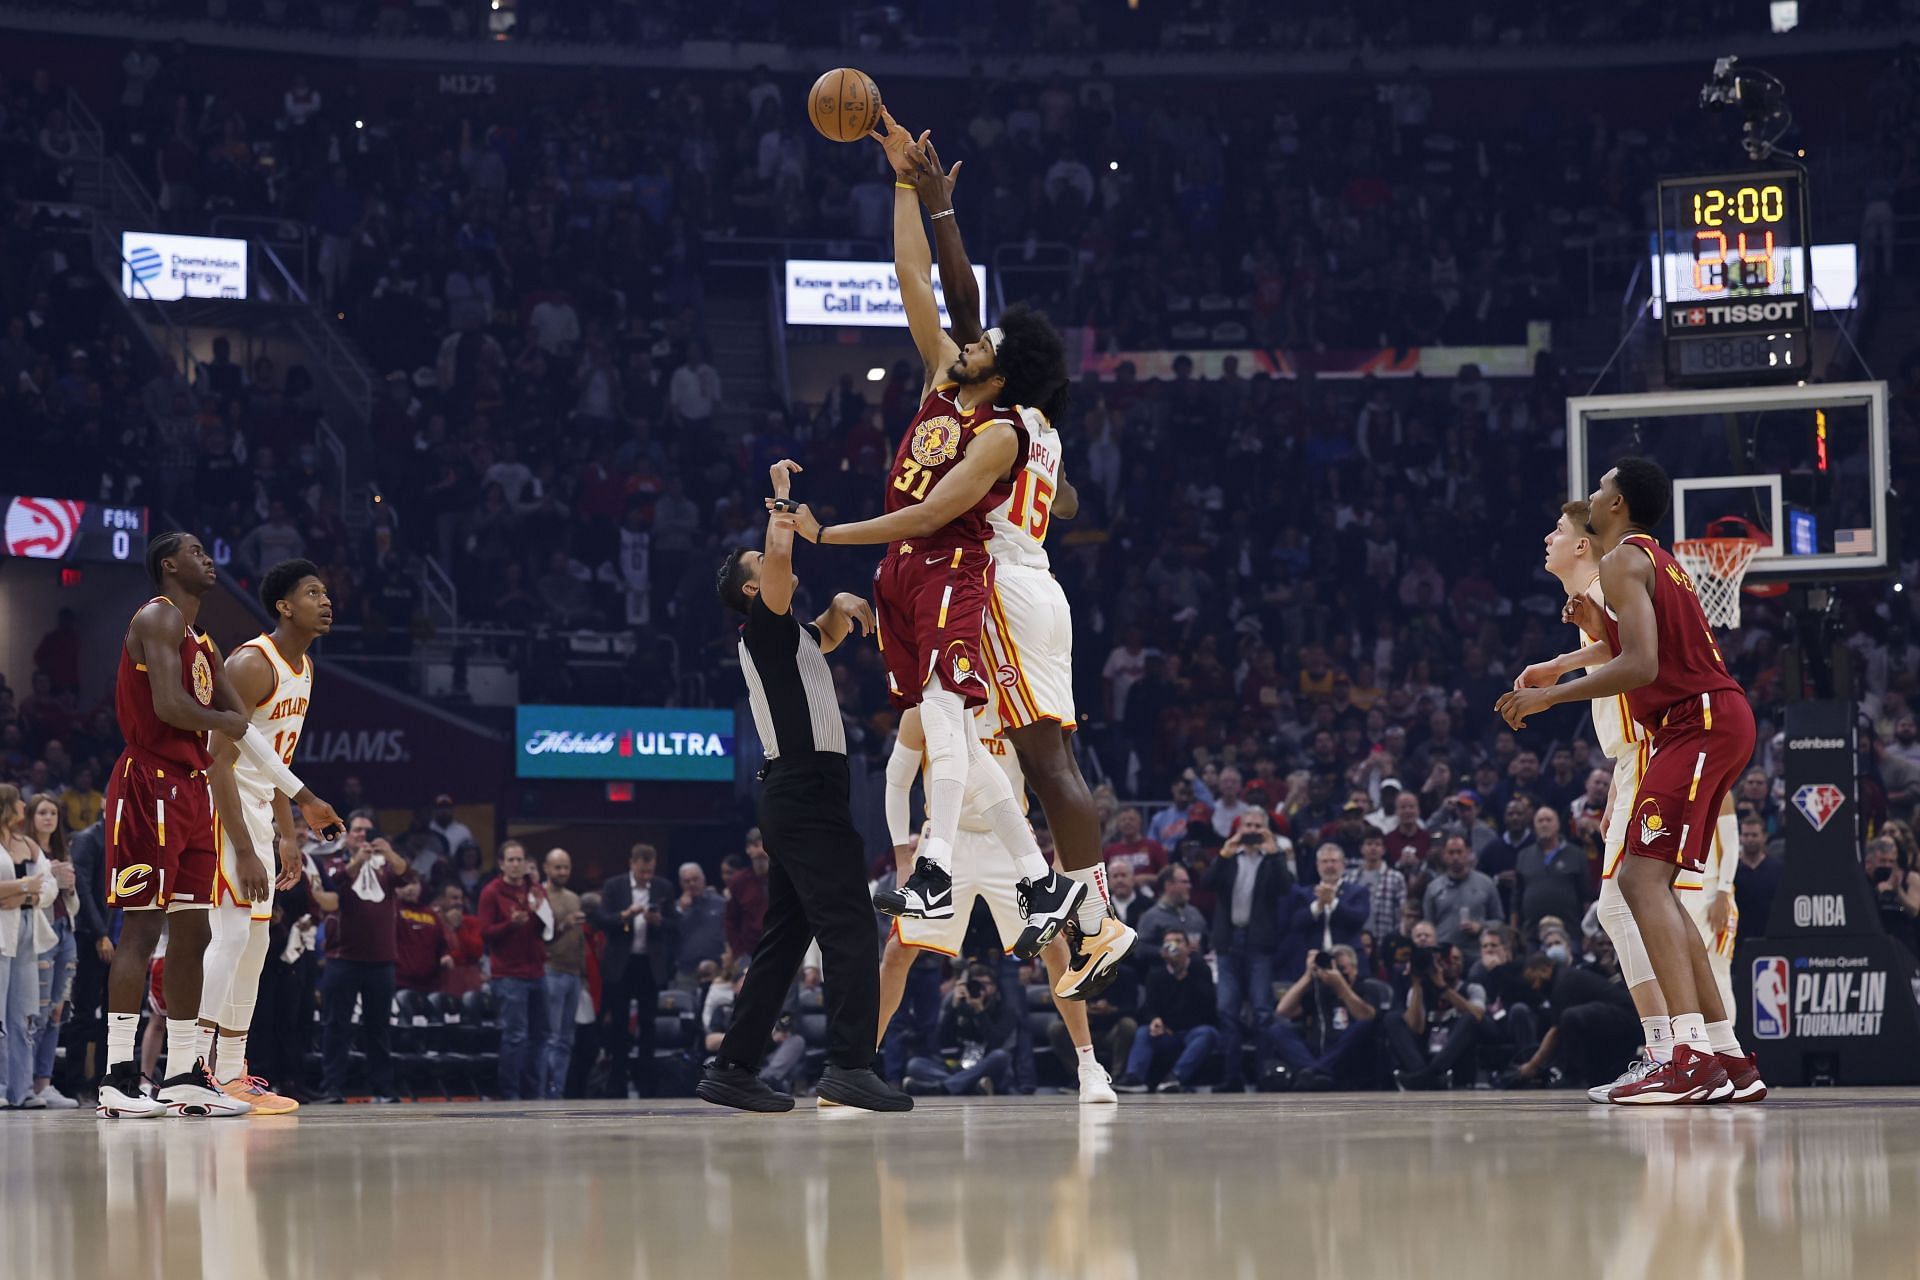 Jarrett Allen #31 of the Cleveland Cavaliers wins the tip off over Clint Capela #15 of the Atlanta Hawks in the first half at Rocket Mortgage Fieldhouse on April 15, 2022 in Cleveland, Ohio.